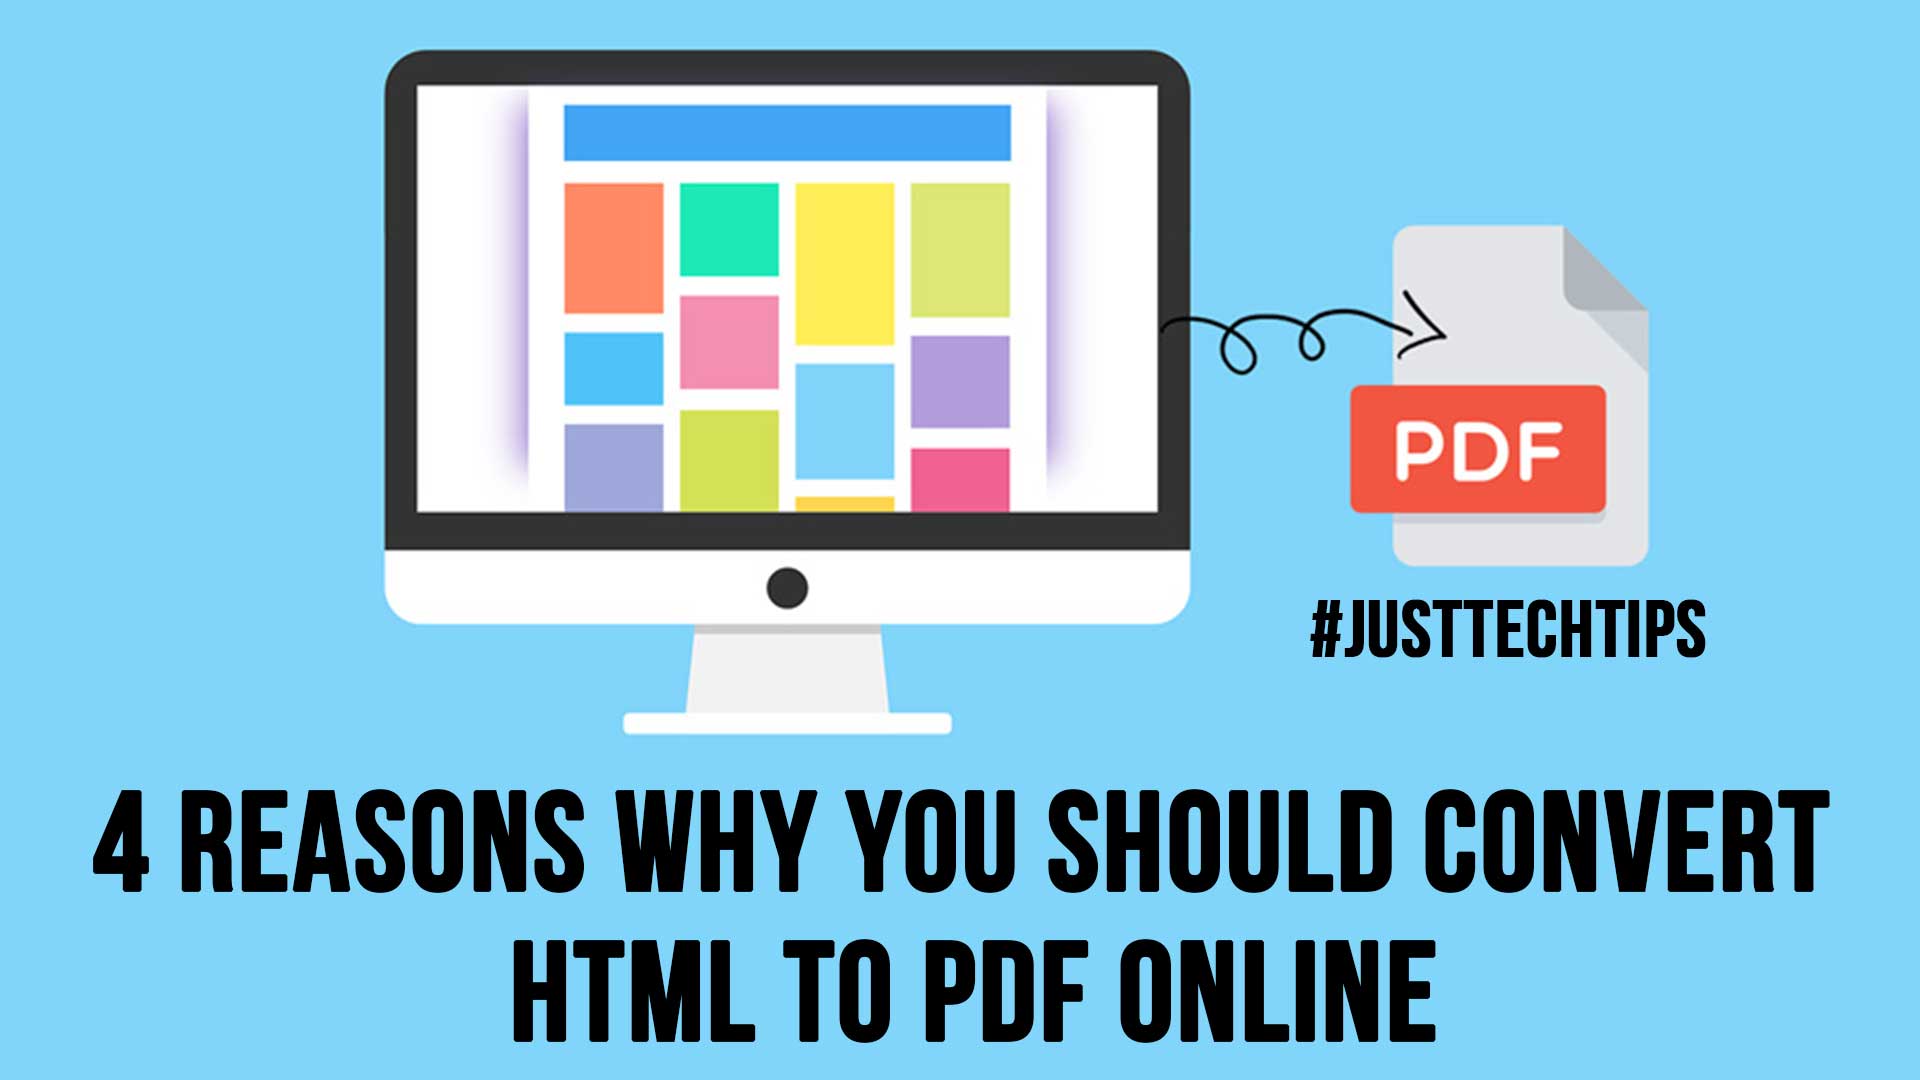 4 Reasons Why You Should Convert HTML to PDF Online